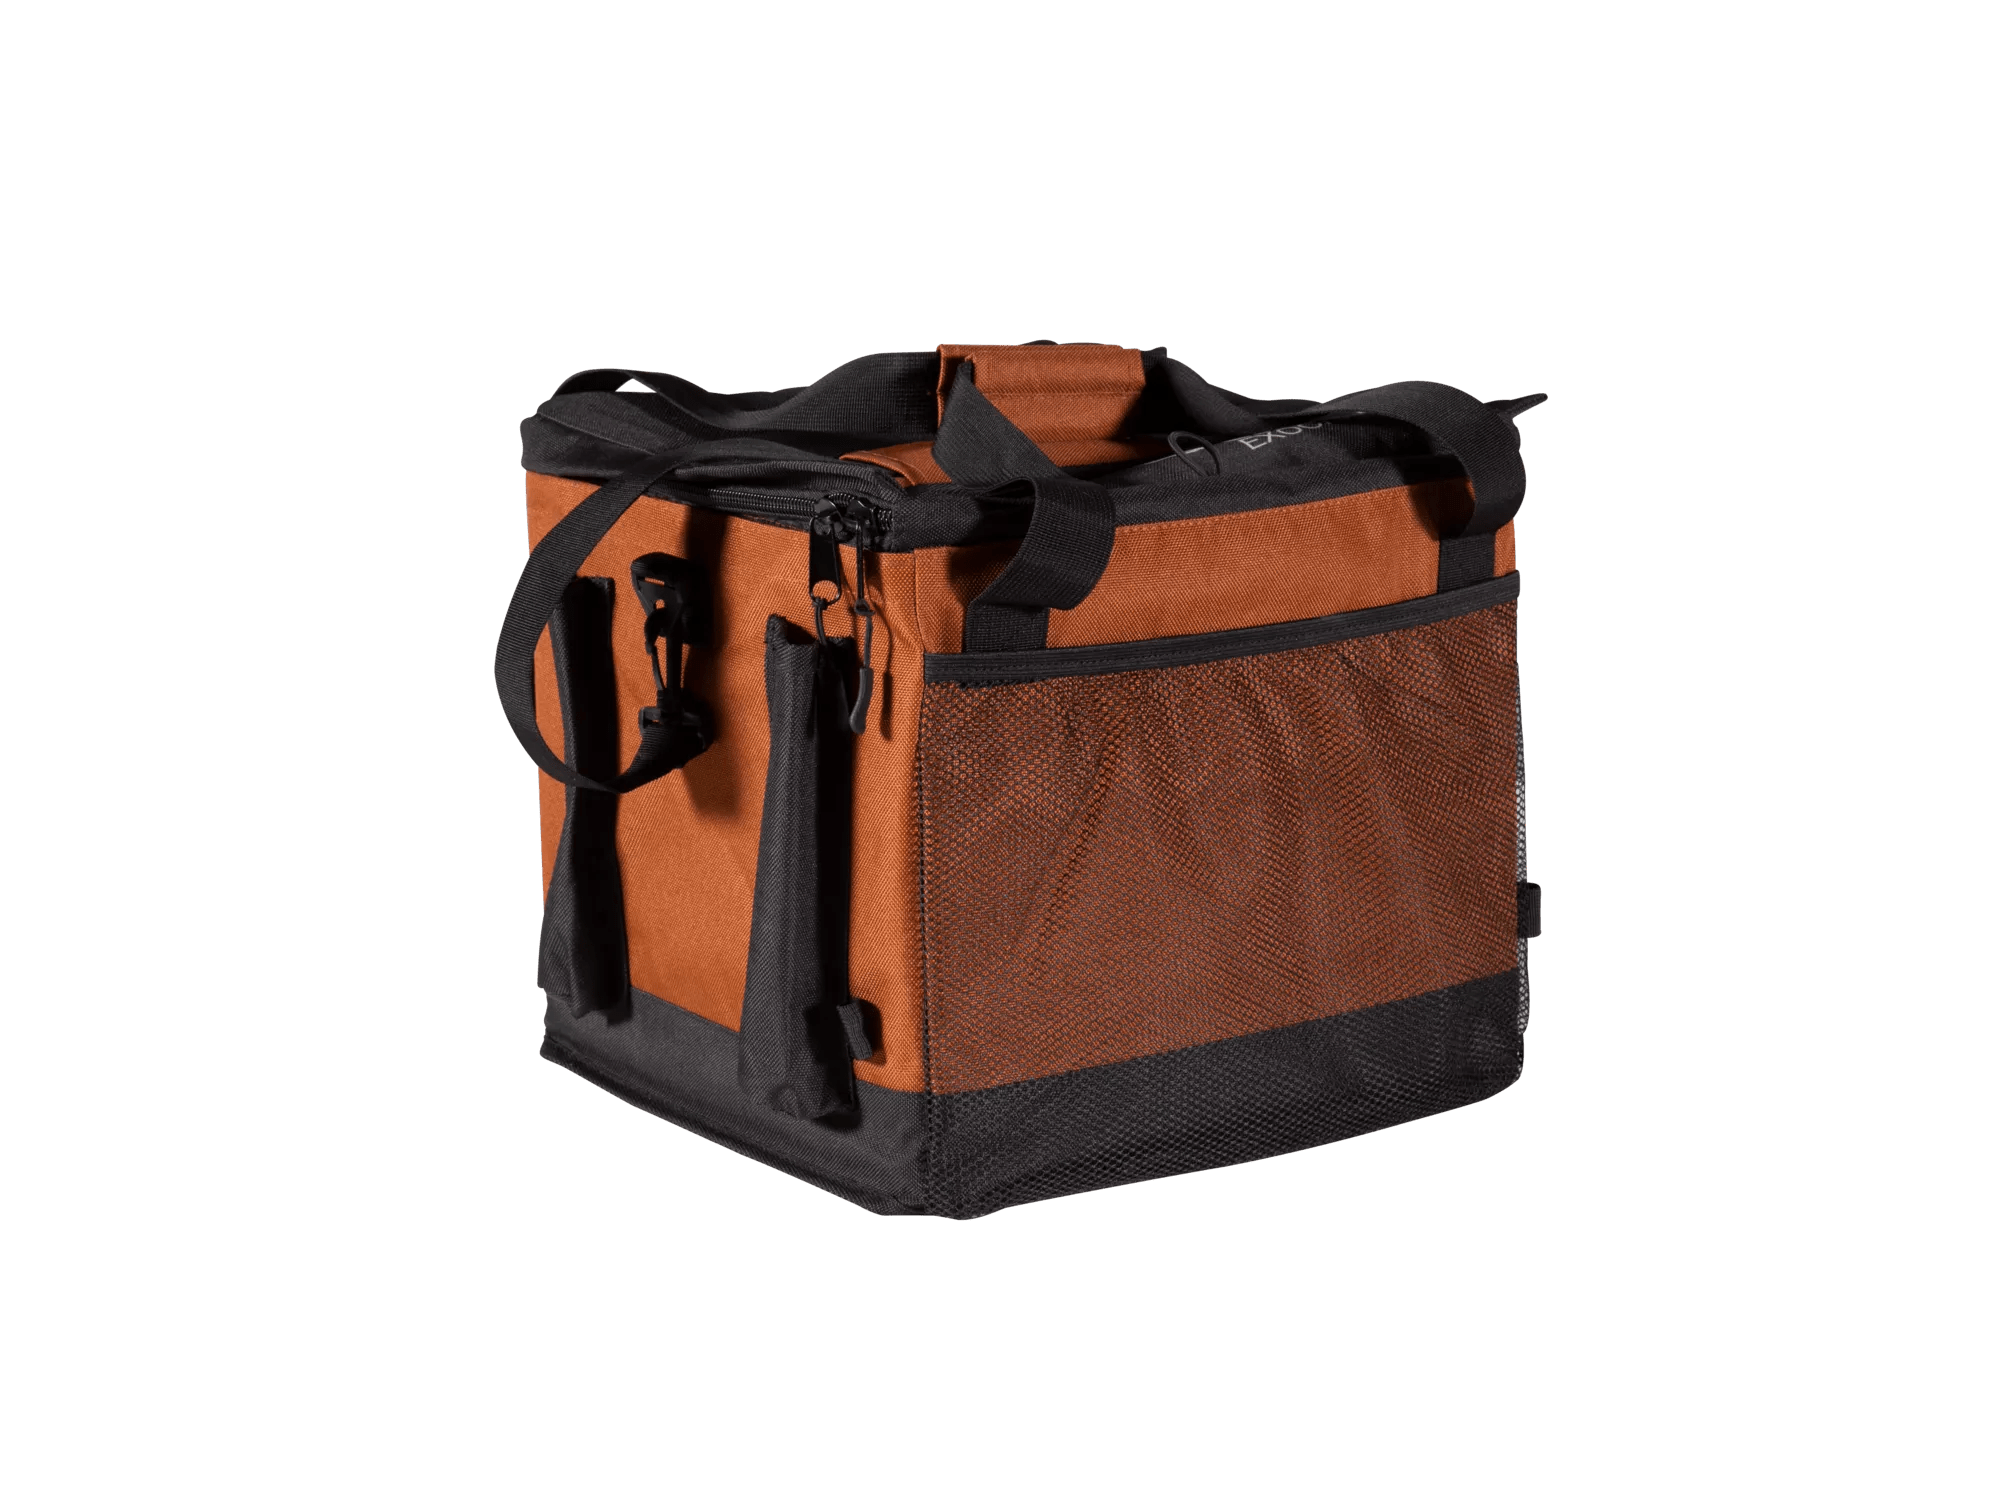 PELICAN - Exocrate Fishing Crate Bag - Black - PS1953 - SIDE